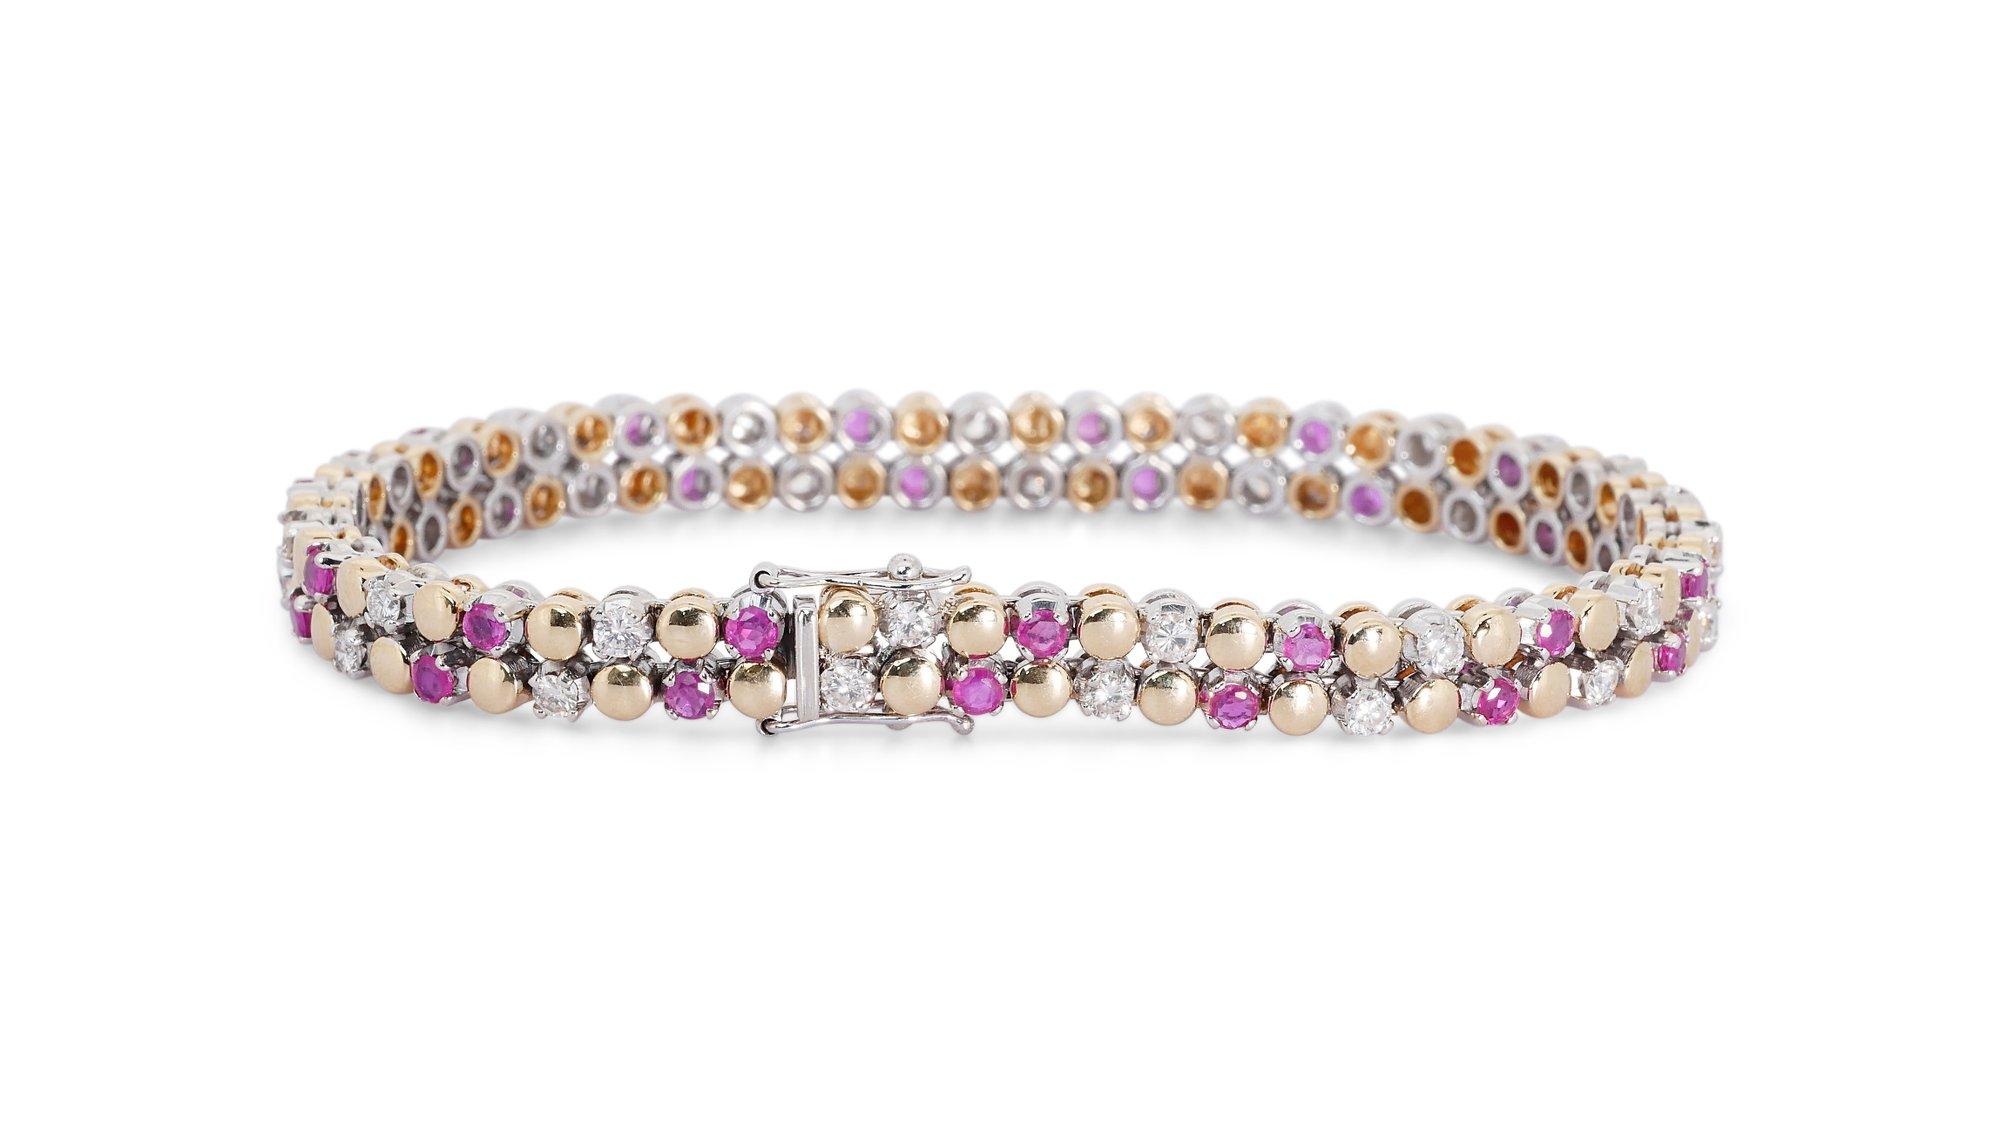 Colorful 18K White Gold Bracelet w/ 2.7 ct Ruby and Natural Diamonds IGI Cert For Sale 1